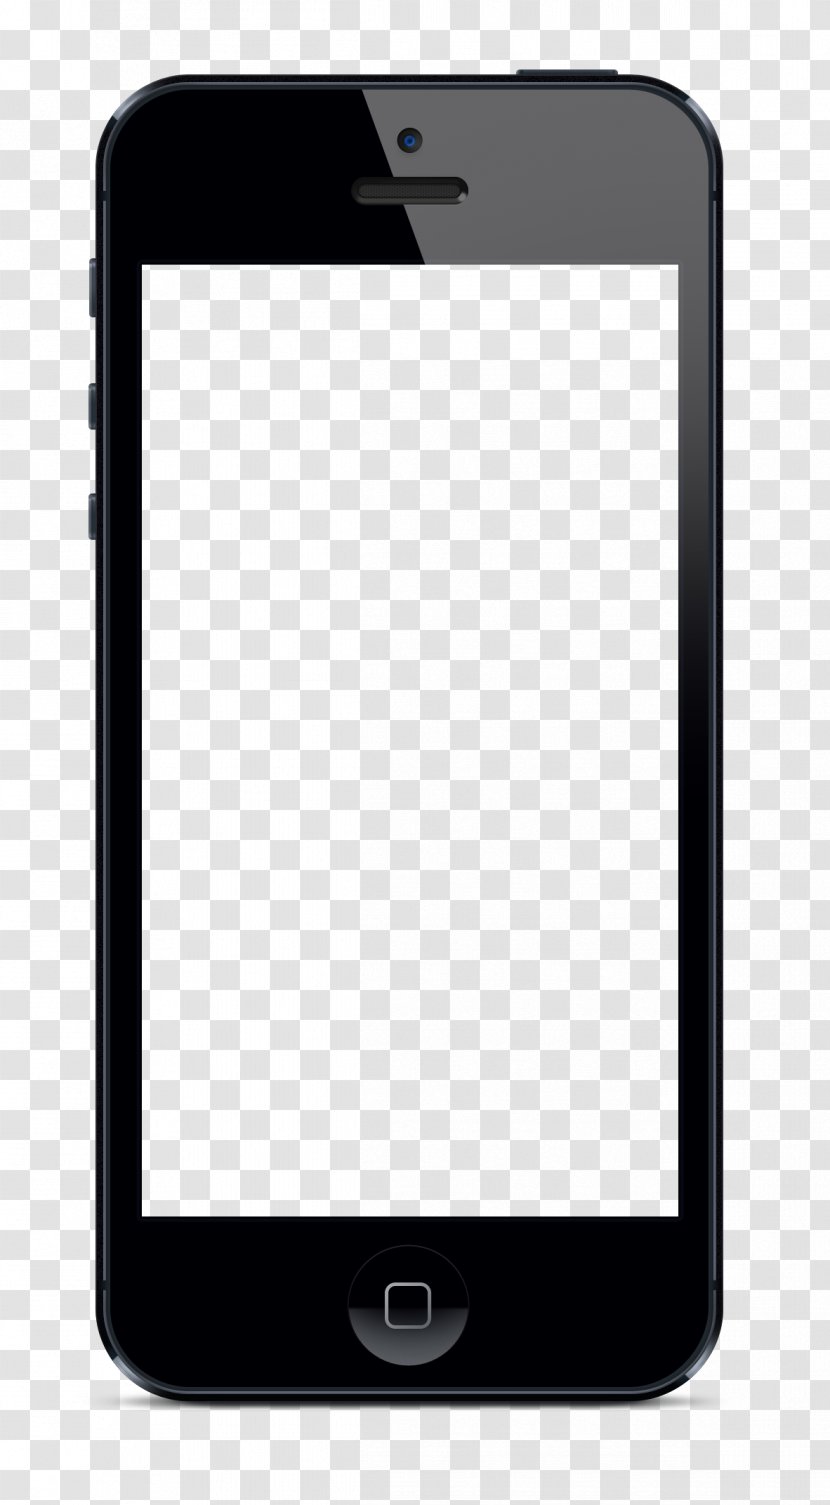 Samsung Galaxy Smartphone Telephone Clip Art - Cellular Network - Blank IPhone X Transparent PNG